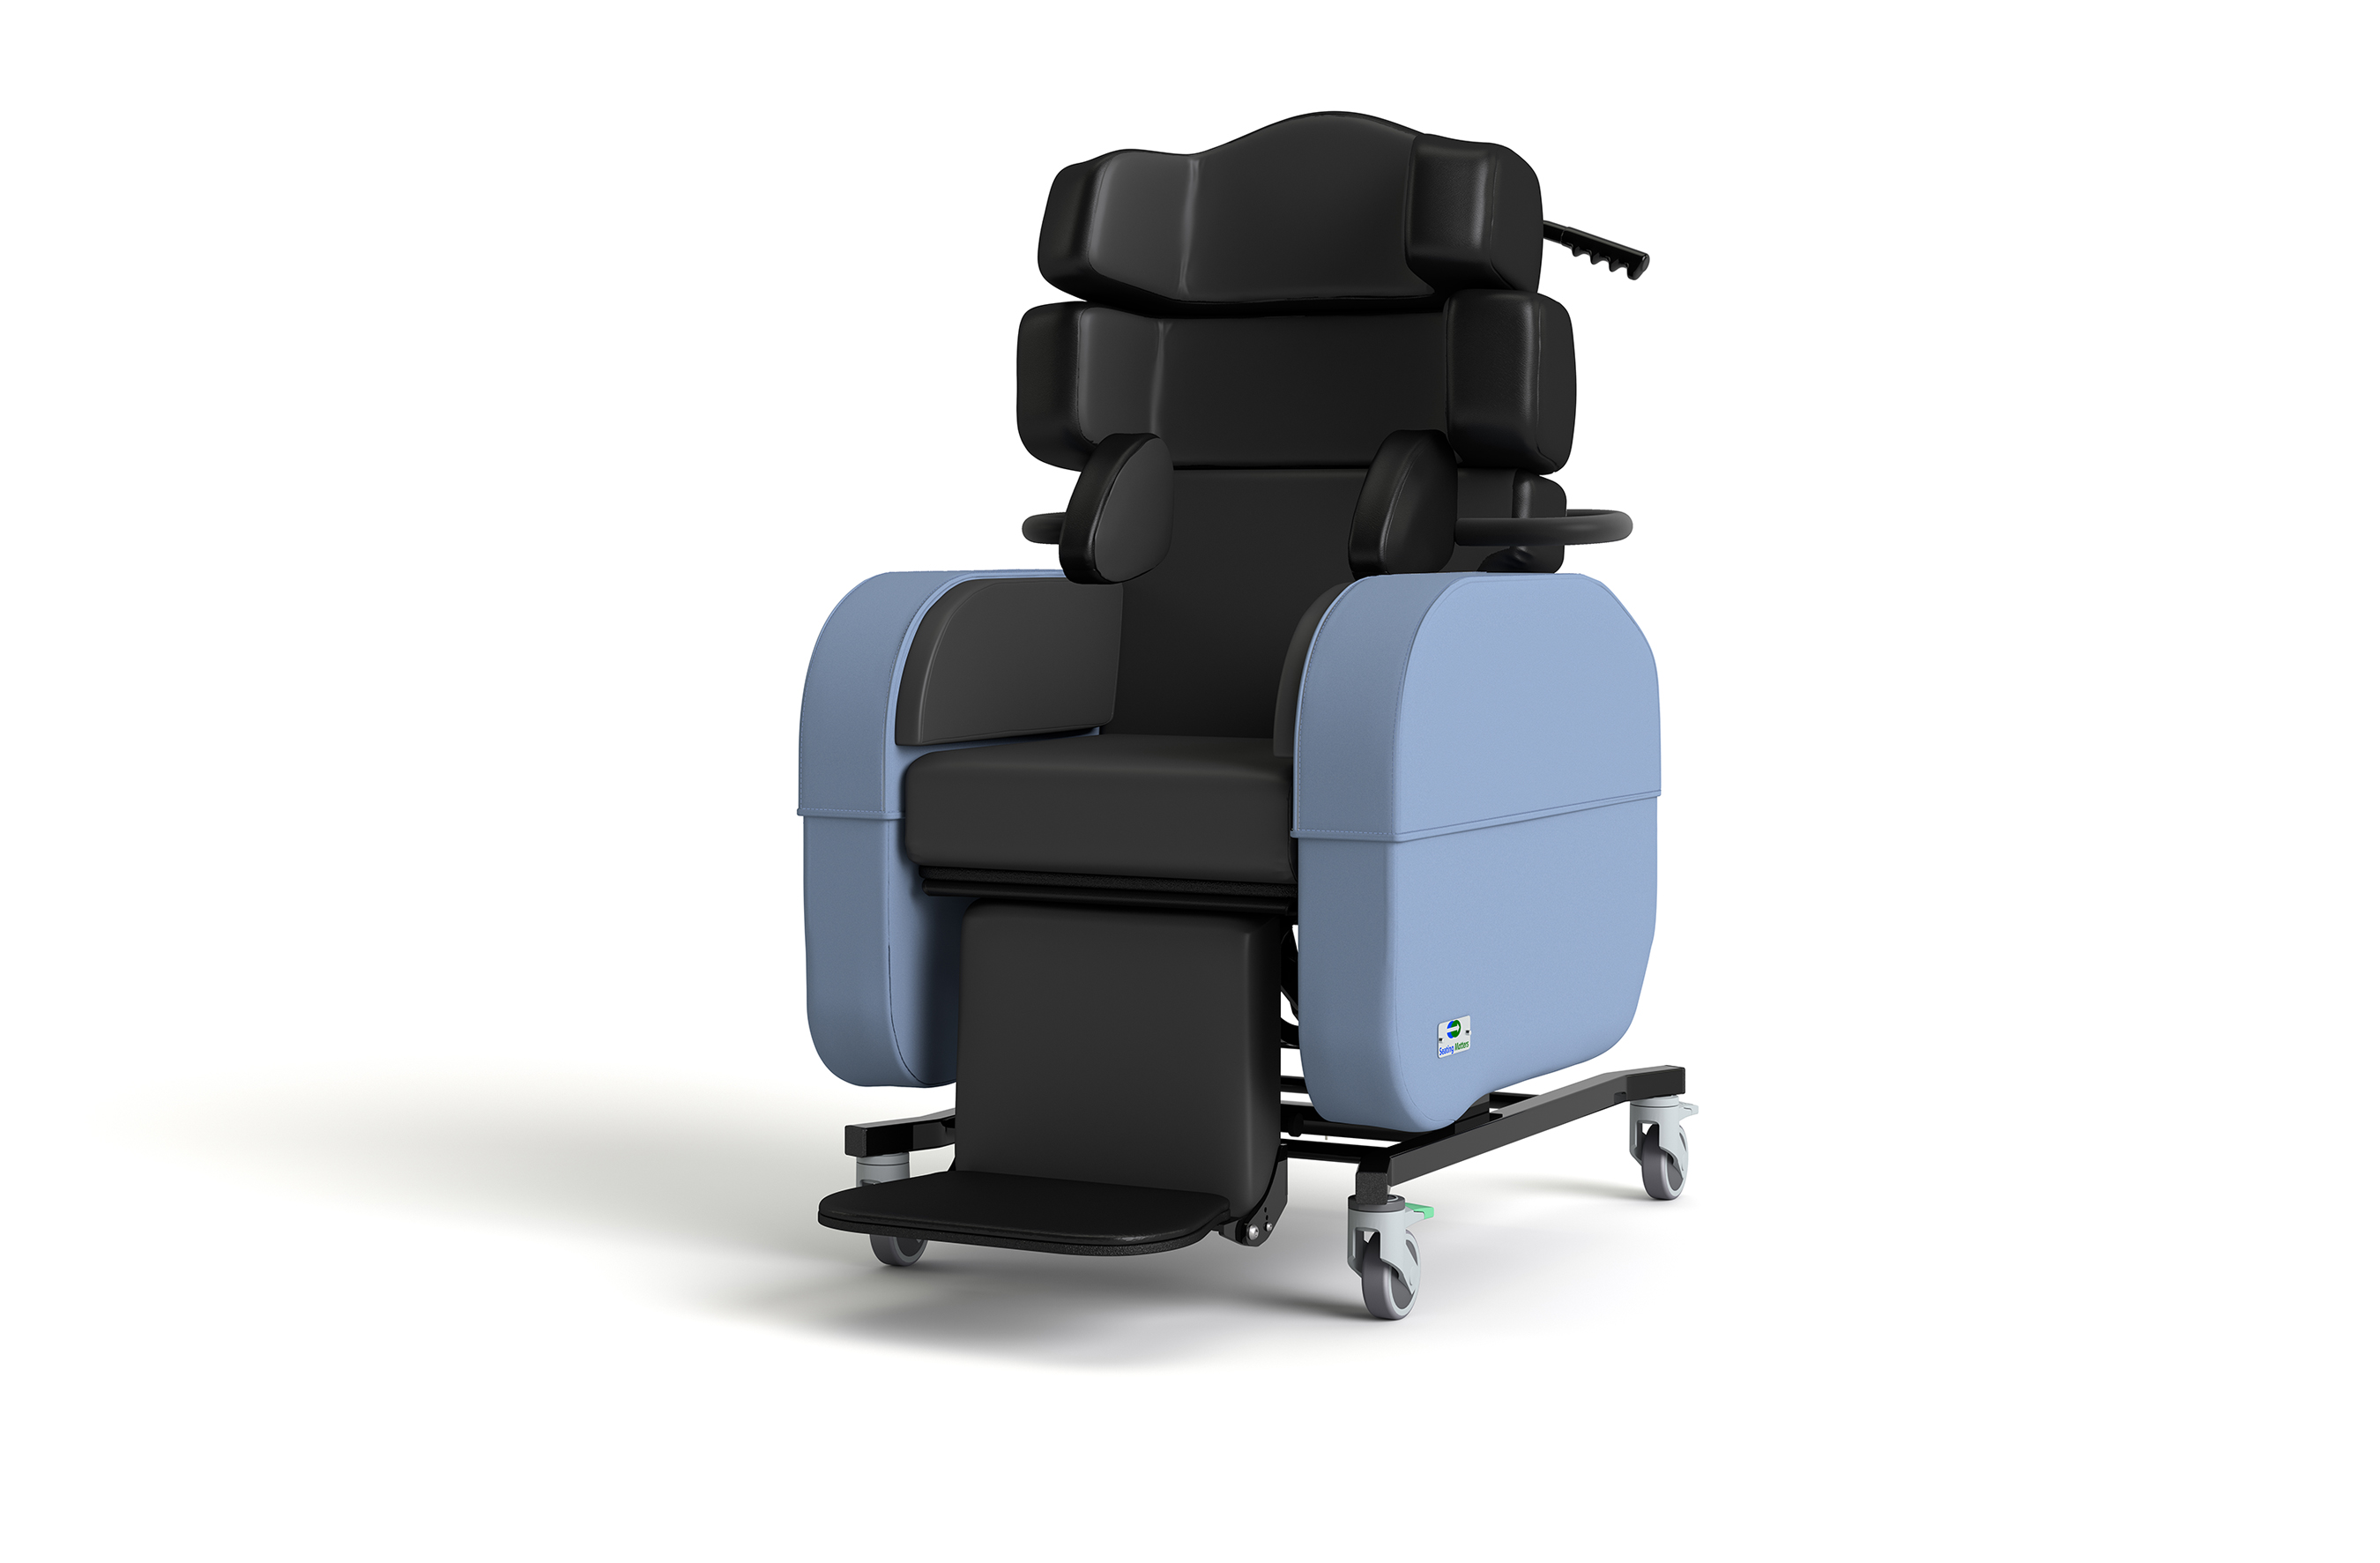 The most supportive and functional of our therapeutic chairs, the Phoenixtm provides maximum support for the upper body with head support for patients with complex postural needs and spinal problems.